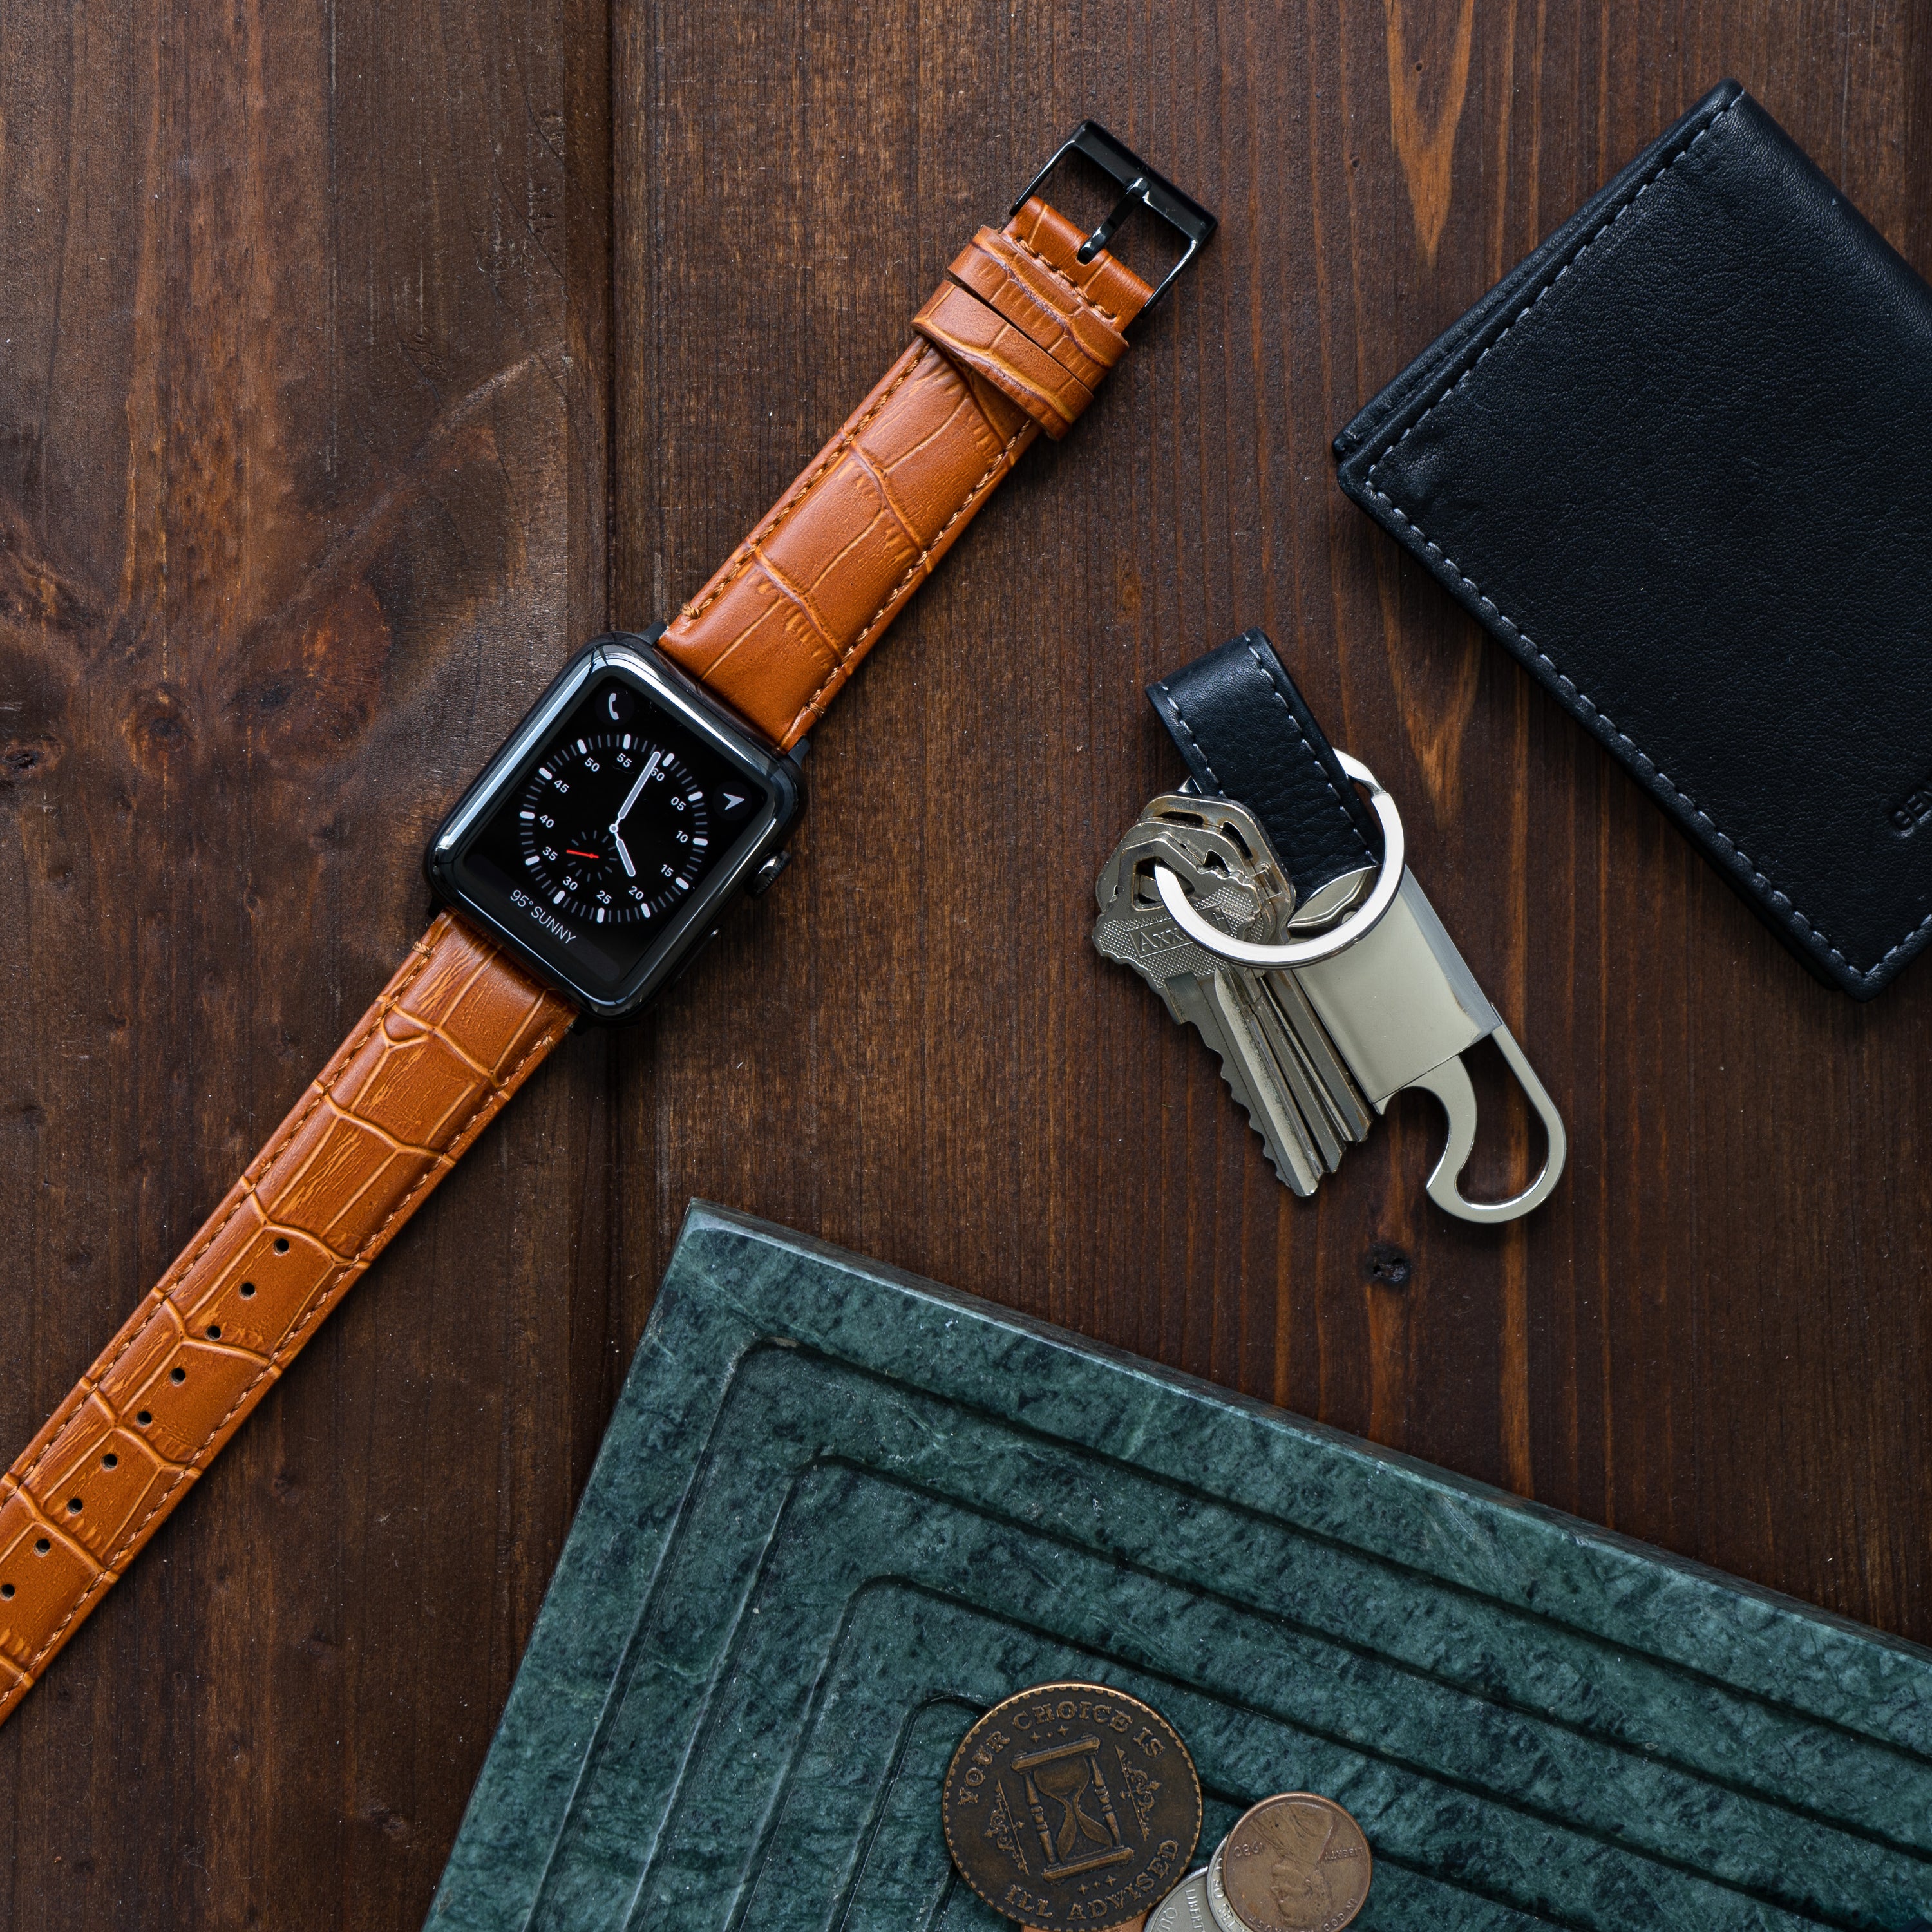 BARTON Watch Bands, The Strap Your Watch Deserves